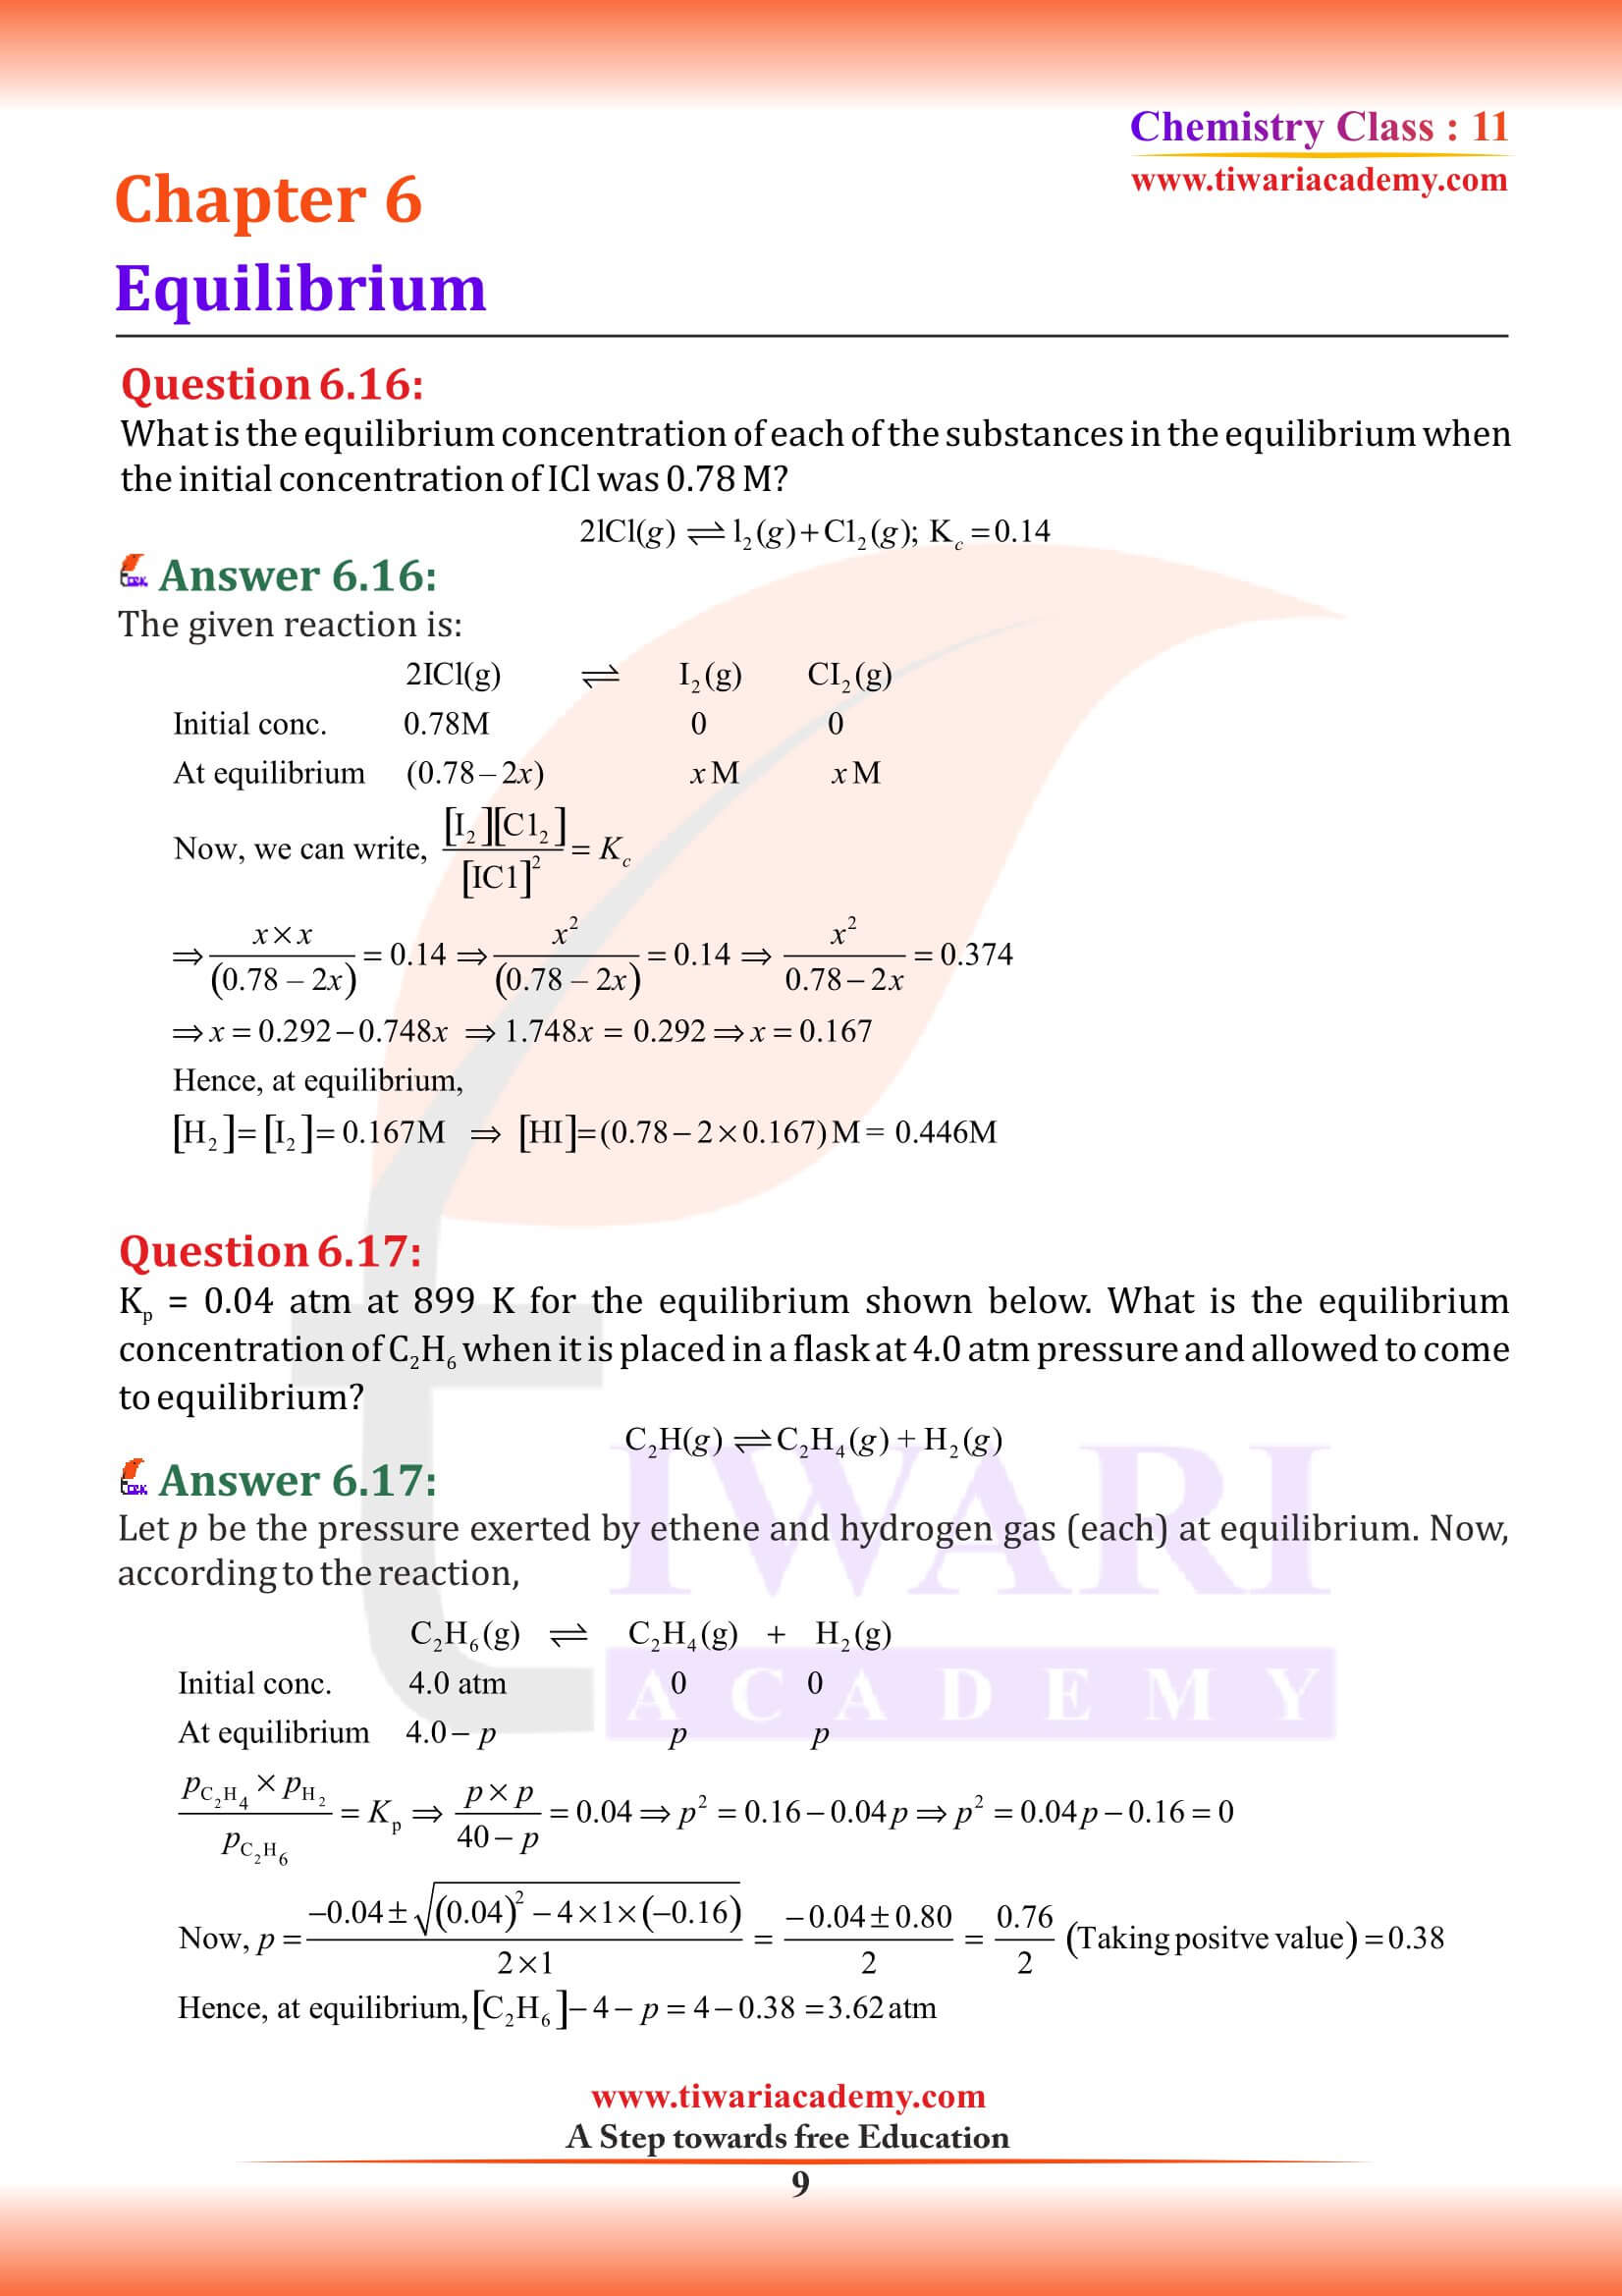 NCERT Solutions for Class 11 Chemistry Chapter 6 Question answers